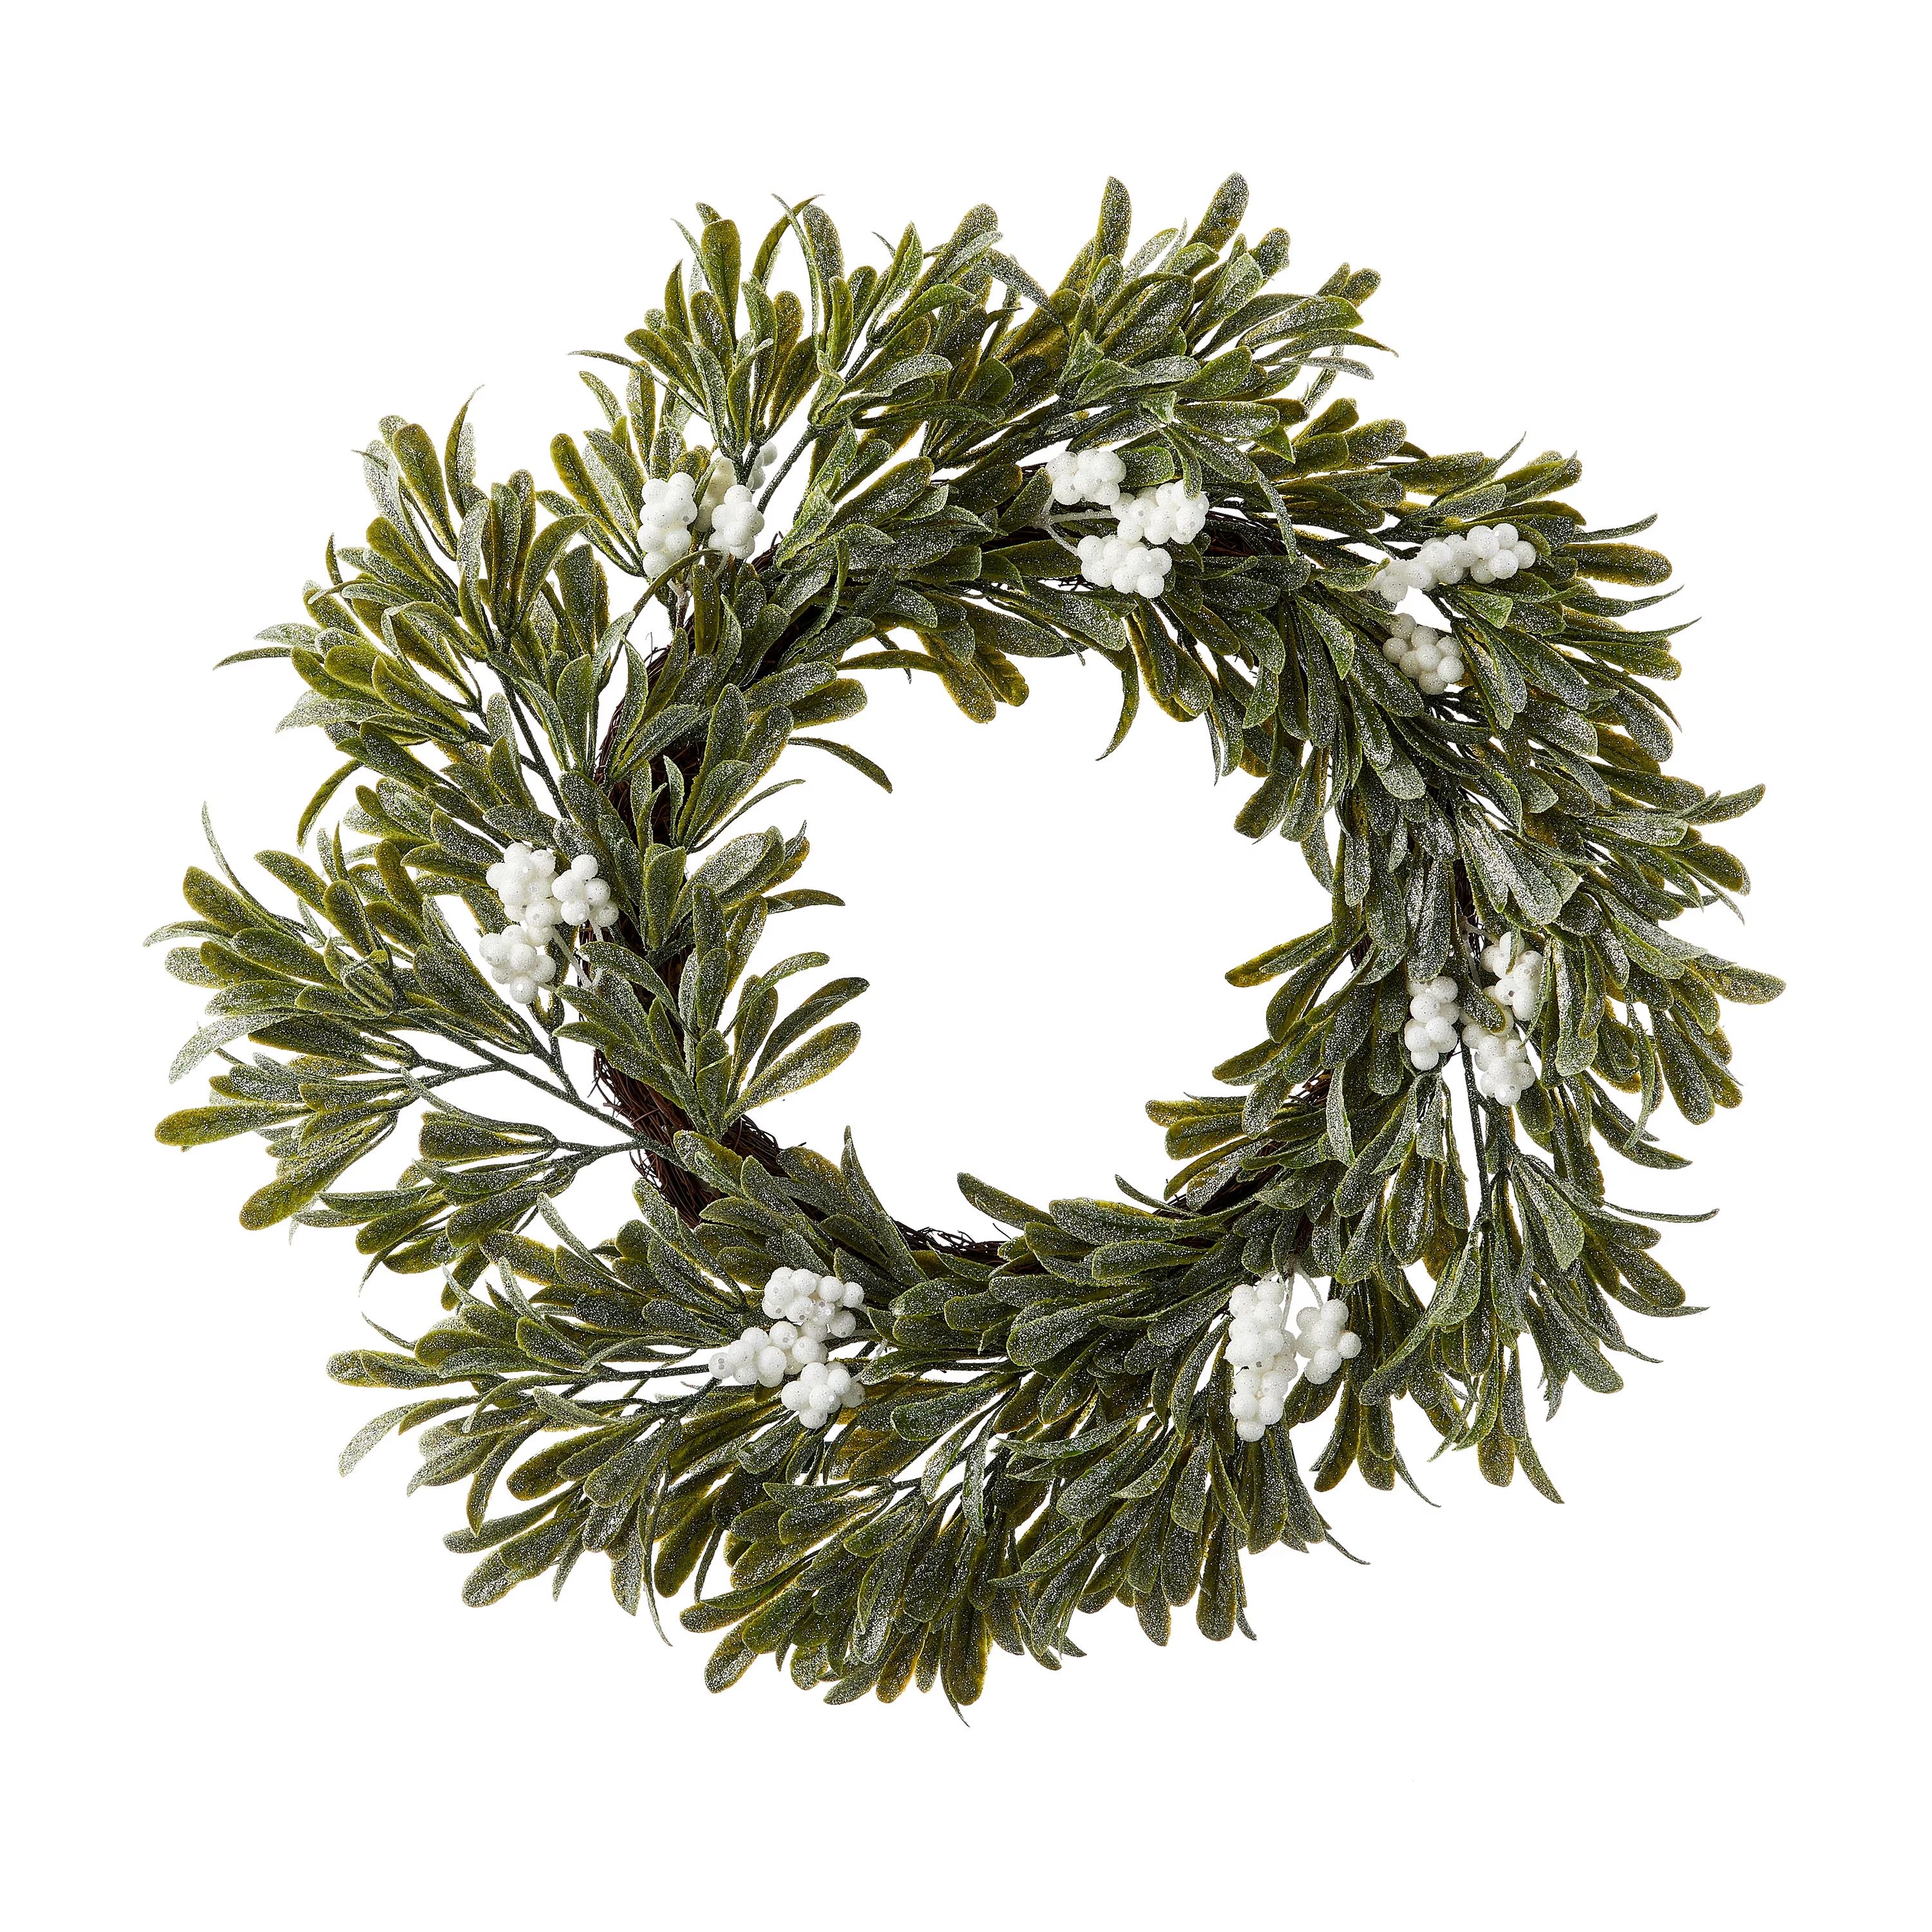 White Berry Greenery Un-Lit Christmas Wreath, 24 in height 24 in length, by Holiday Time | Walmart (US)